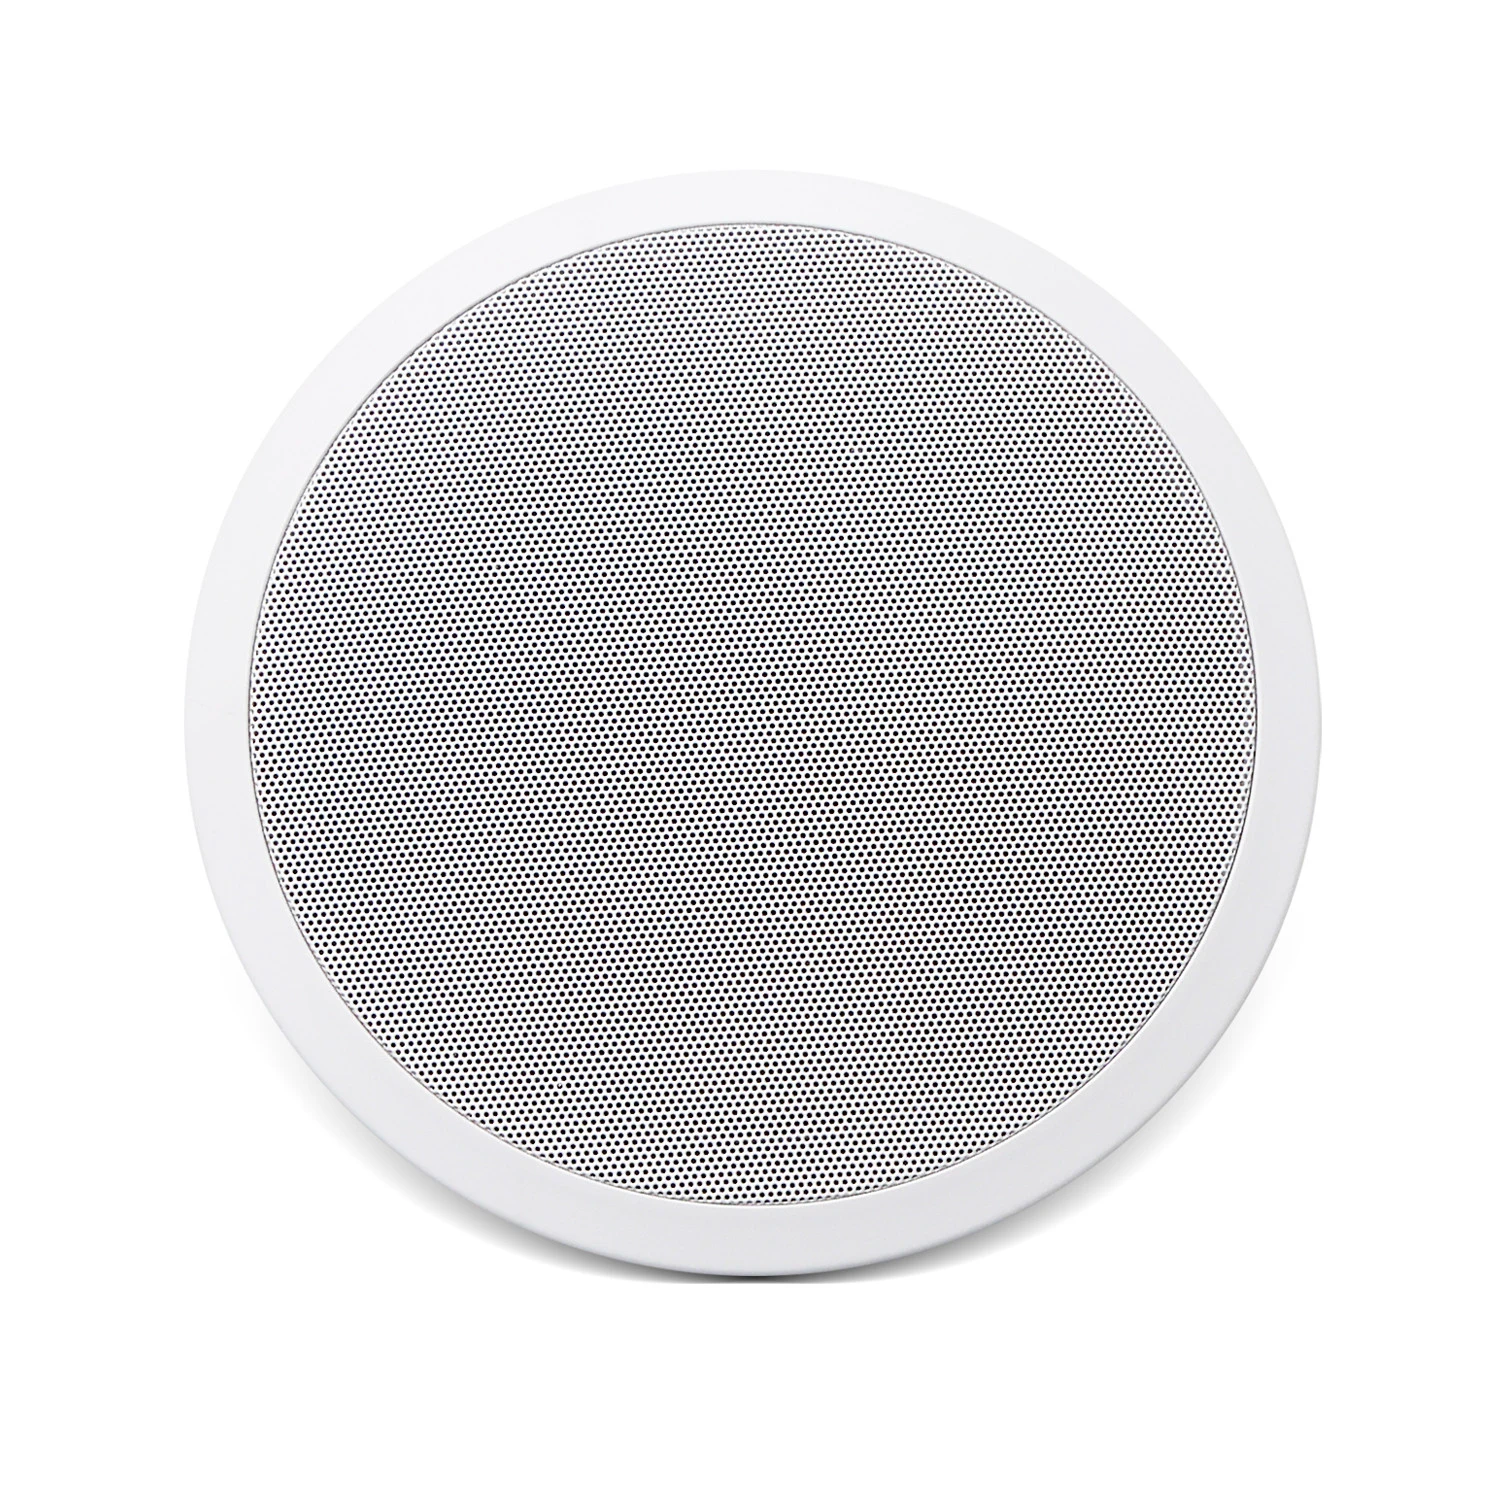 Hot Sale Professional Audio 6 Inch Ceiling Speaker For Home Theatre System,Office,Shop